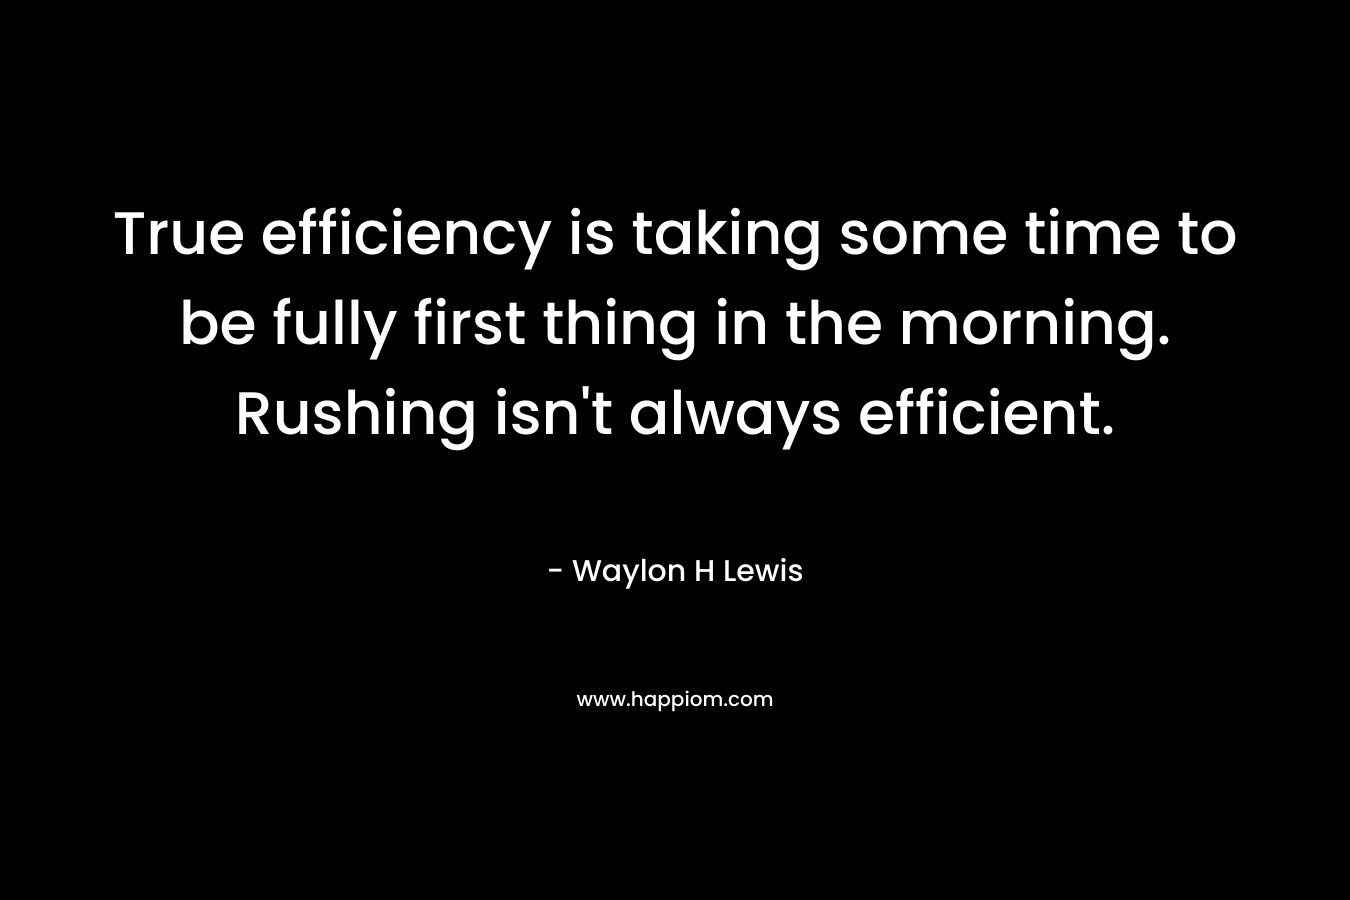 True efficiency is taking some time to be fully first thing in the morning. Rushing isn’t always efficient. – Waylon H Lewis